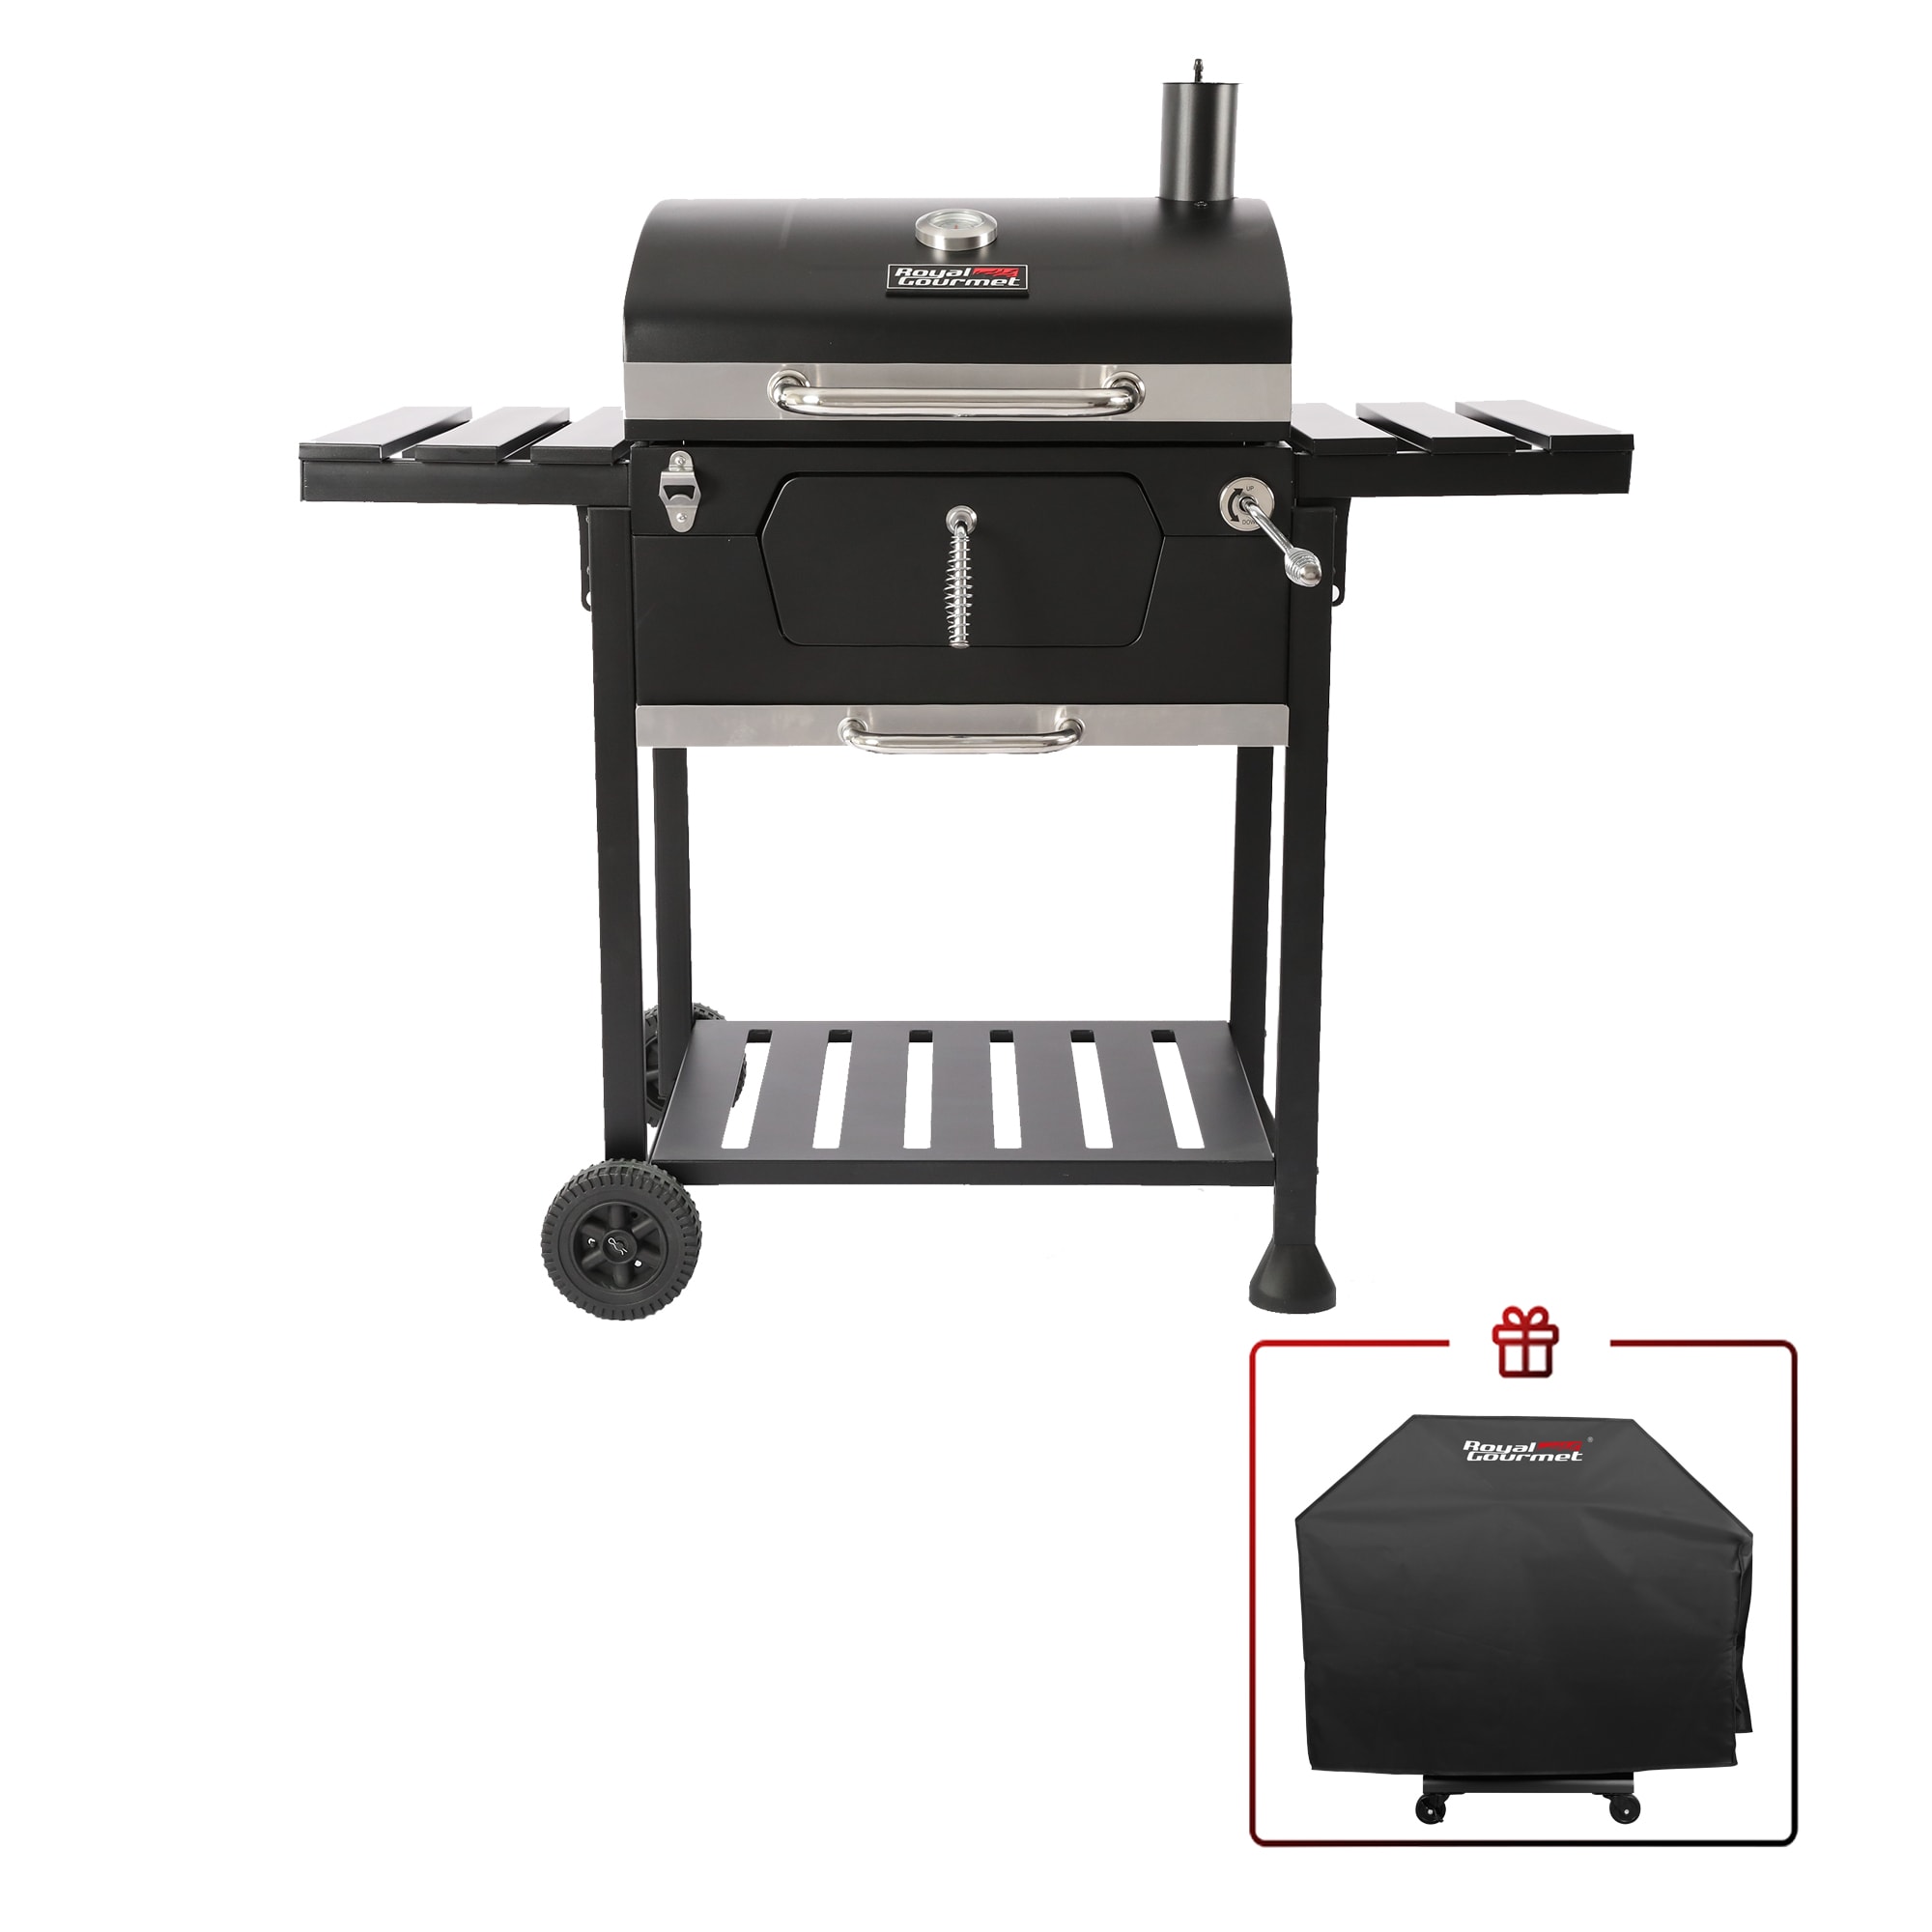 Royal W Black Charcoal Grill in the Grills department at Lowes.com